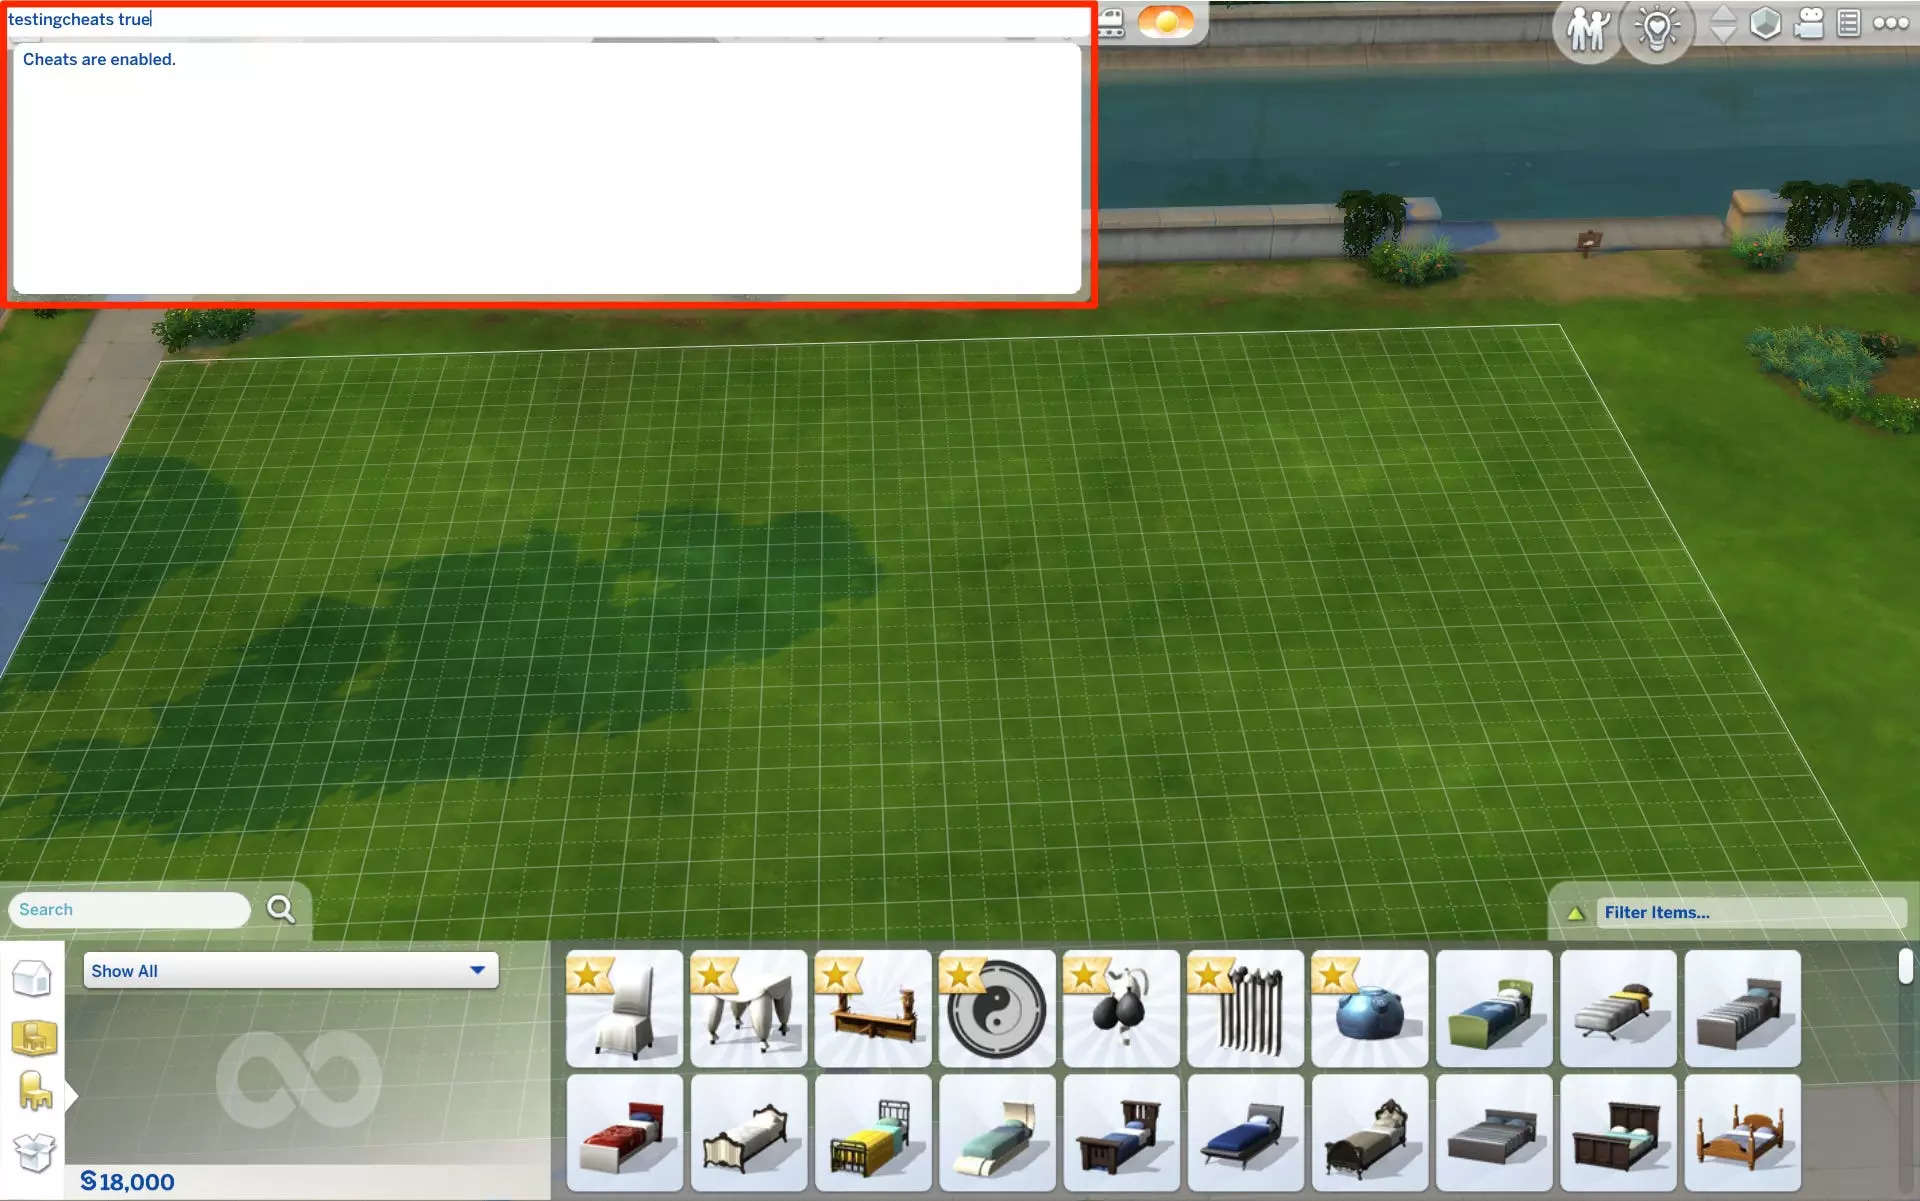 Sims 4 Console Cheats: Everything You Need to Know to Dominate the